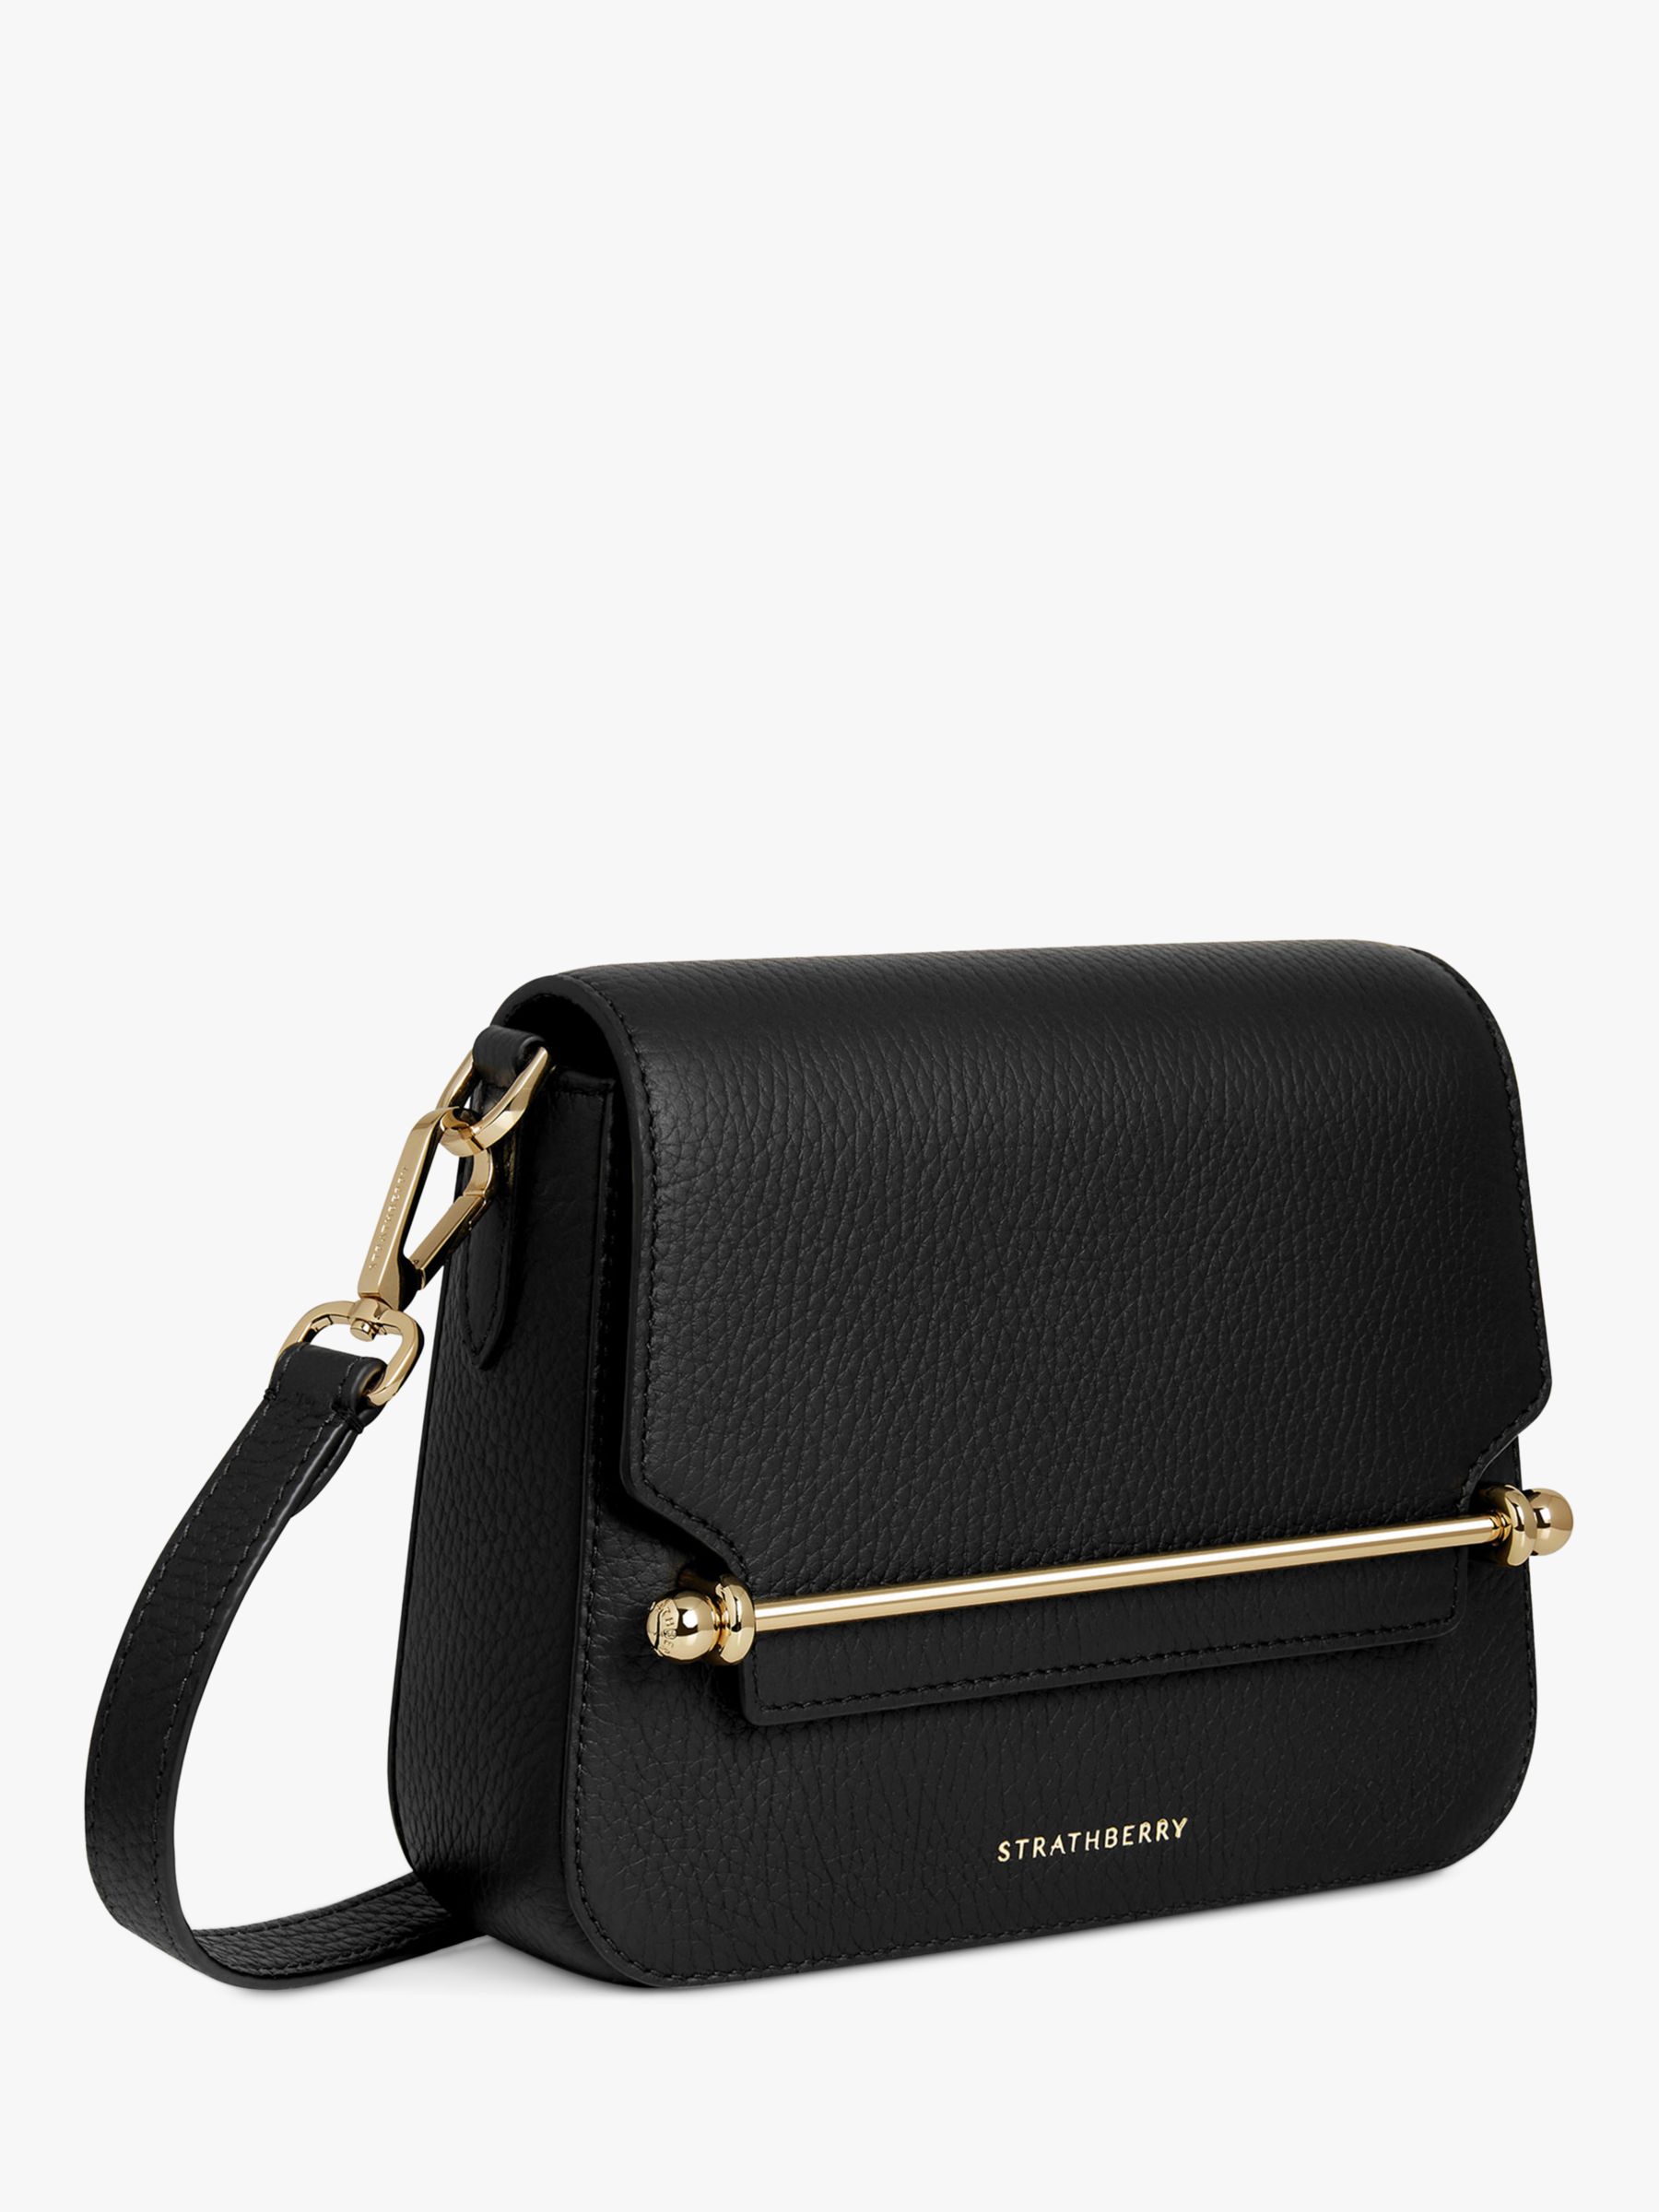 Buy Strathberry Ace Mini Crossbody Online at johnlewis.com